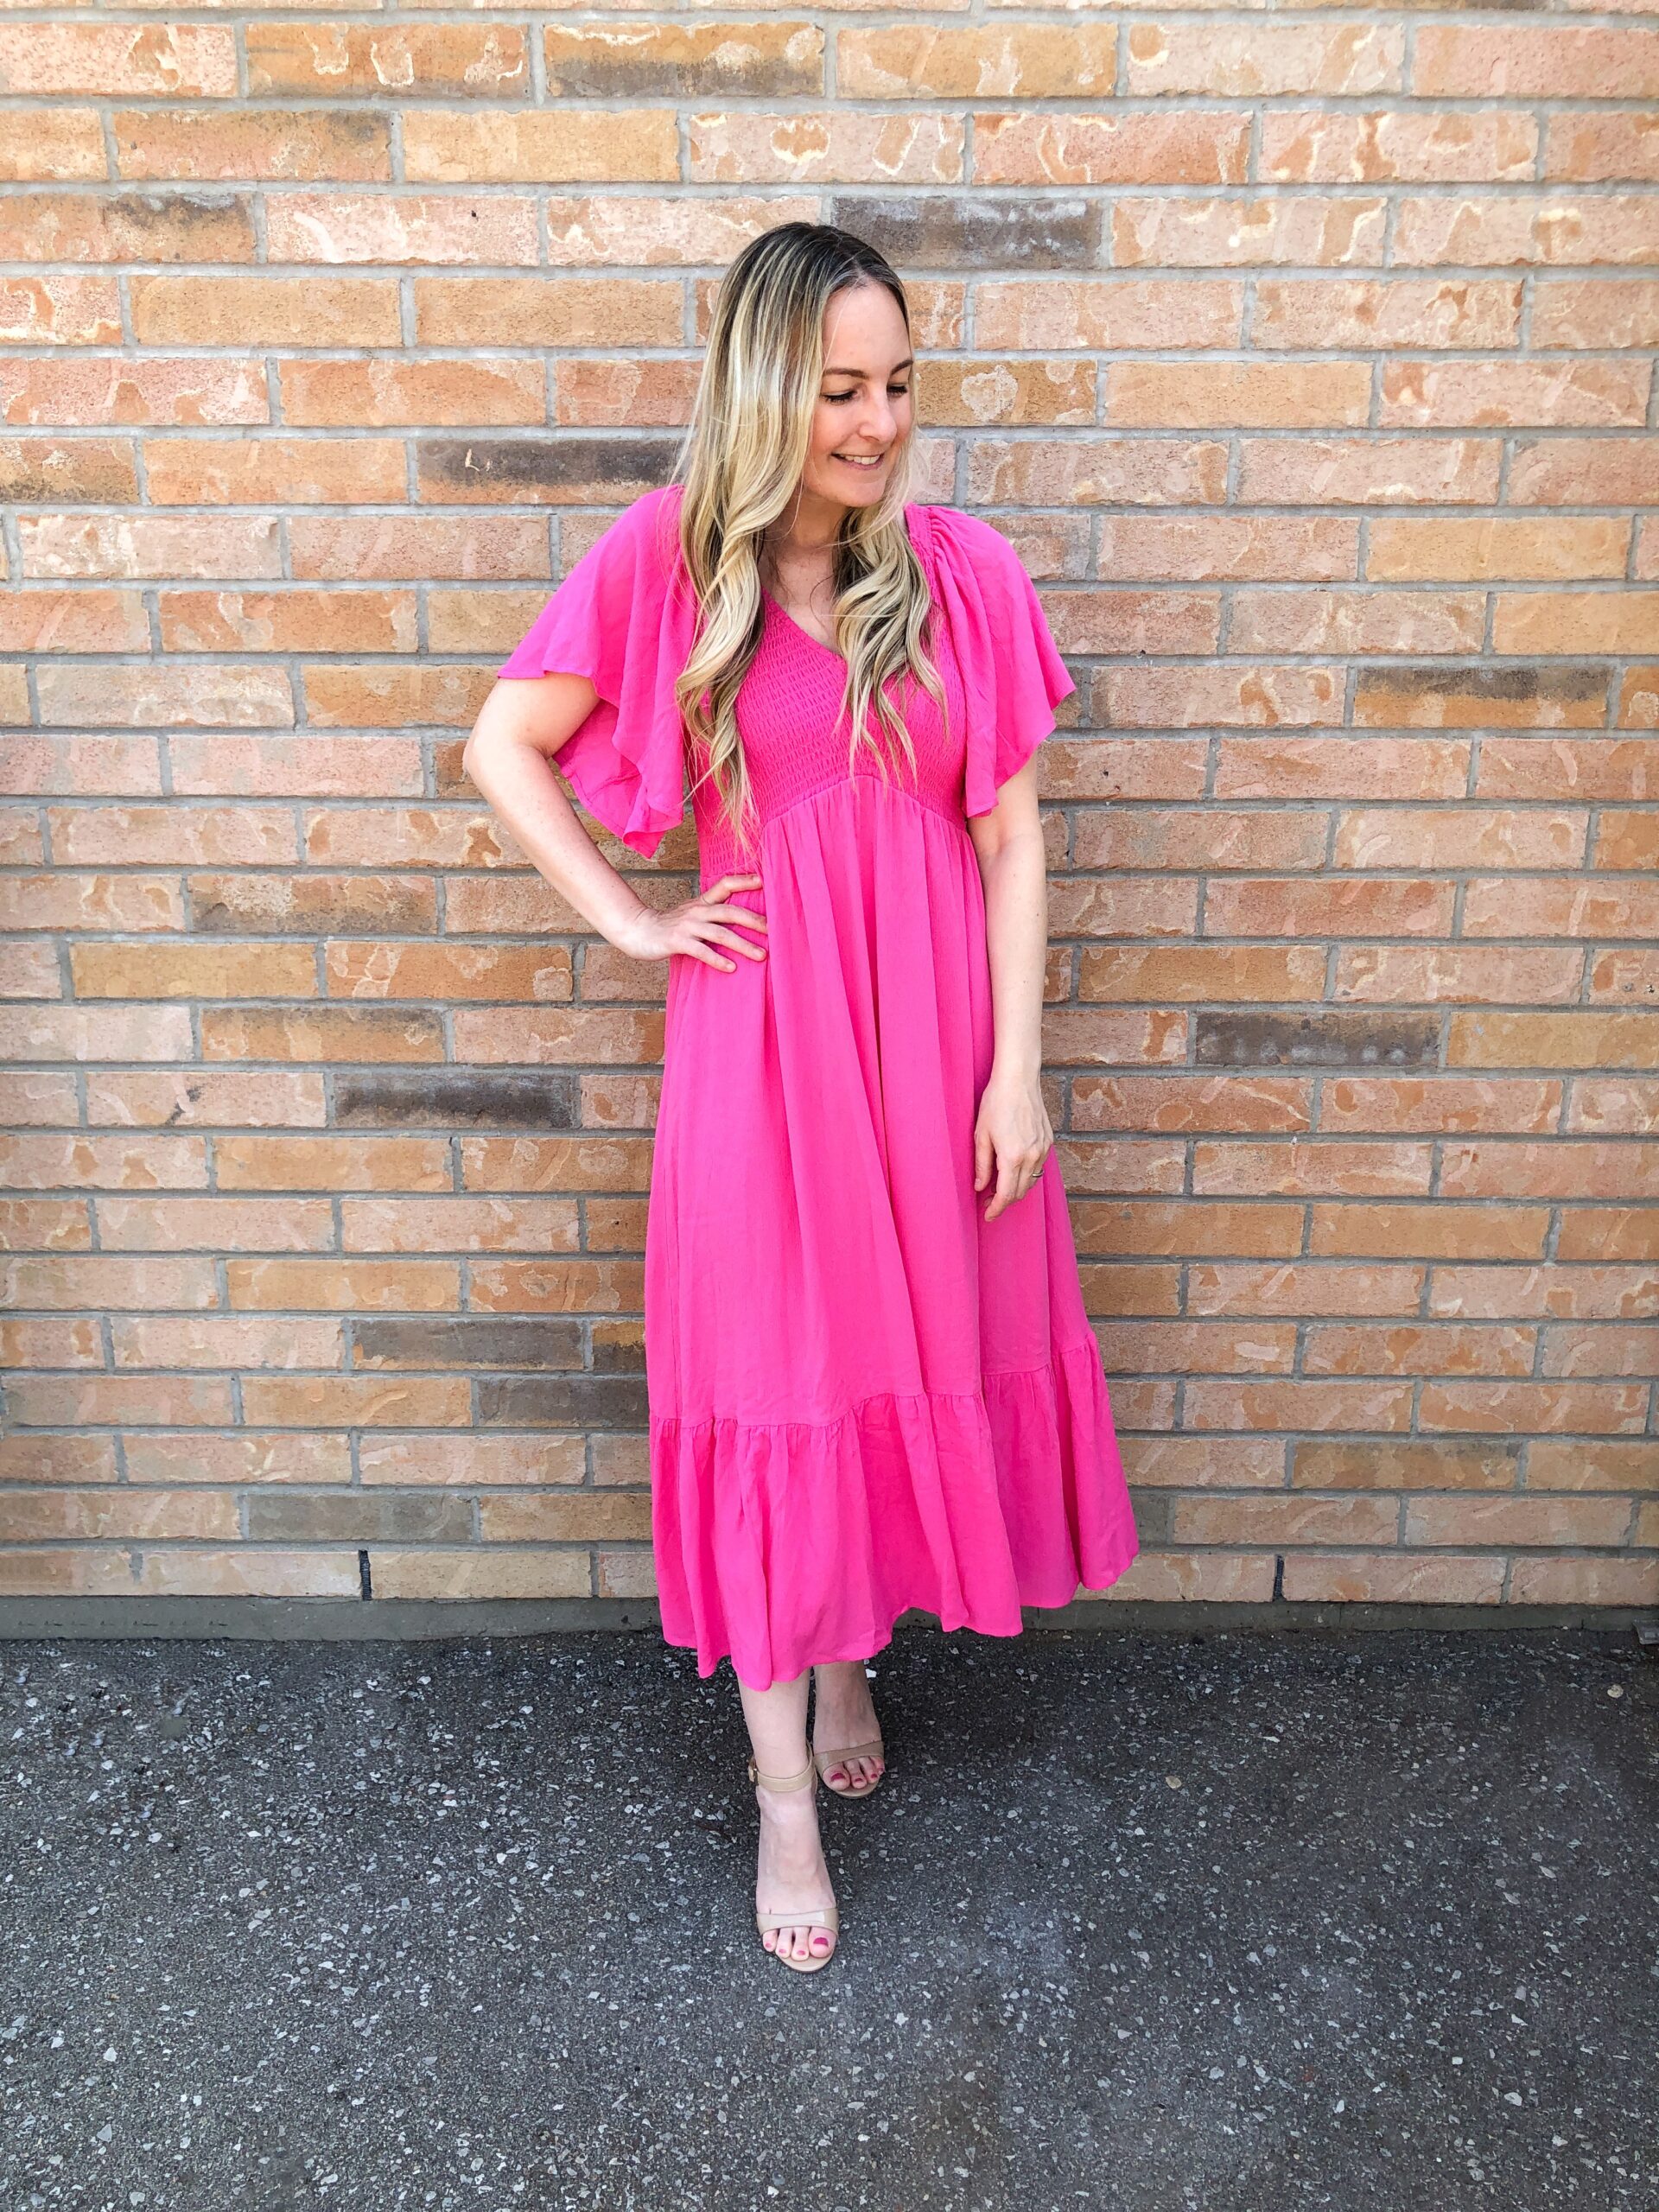 Dress from PinkBlush on Livin' Life with Style 